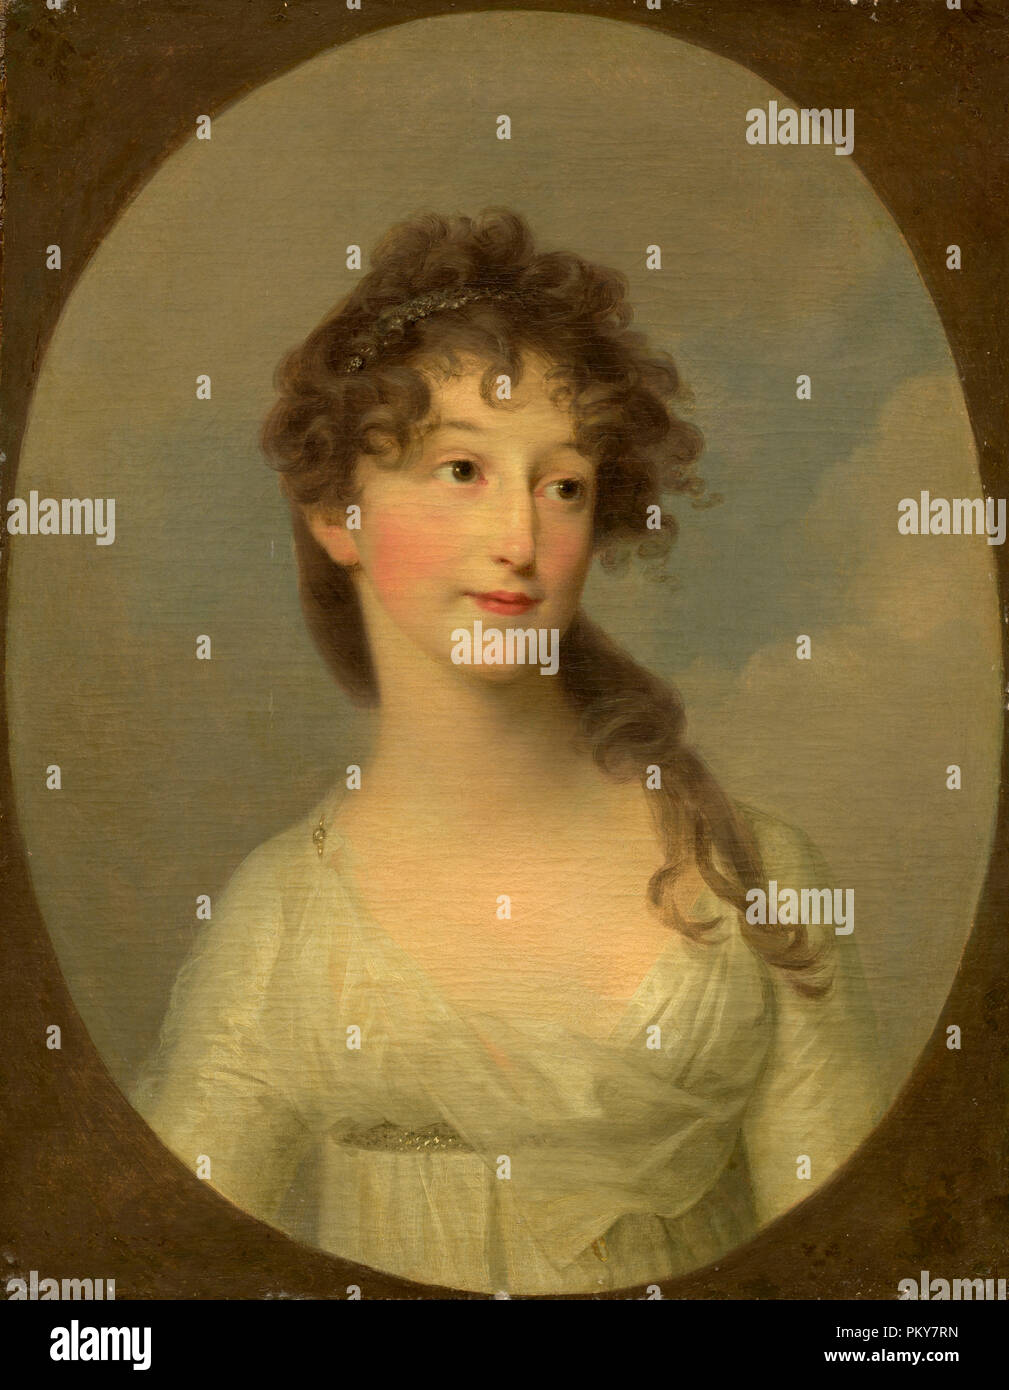 Possibly Franciska Krasinska, Duchess of Courland. Dated: c. 1790. Dimensions: overall (painted oval): 62.9 x 49.5 cm (24 3/4 x 19 1/2 in.)  framed: 72.4 x 57.8 x 3.2 cm (28 1/2 x 22 3/4 x 1 1/4 in.). Medium: oil on canvas. Museum: National Gallery of Art, Washington DC. Author: KAUFFMANN, ANGELICA. ANGELIKA KAUFFMANN. Stock Photo